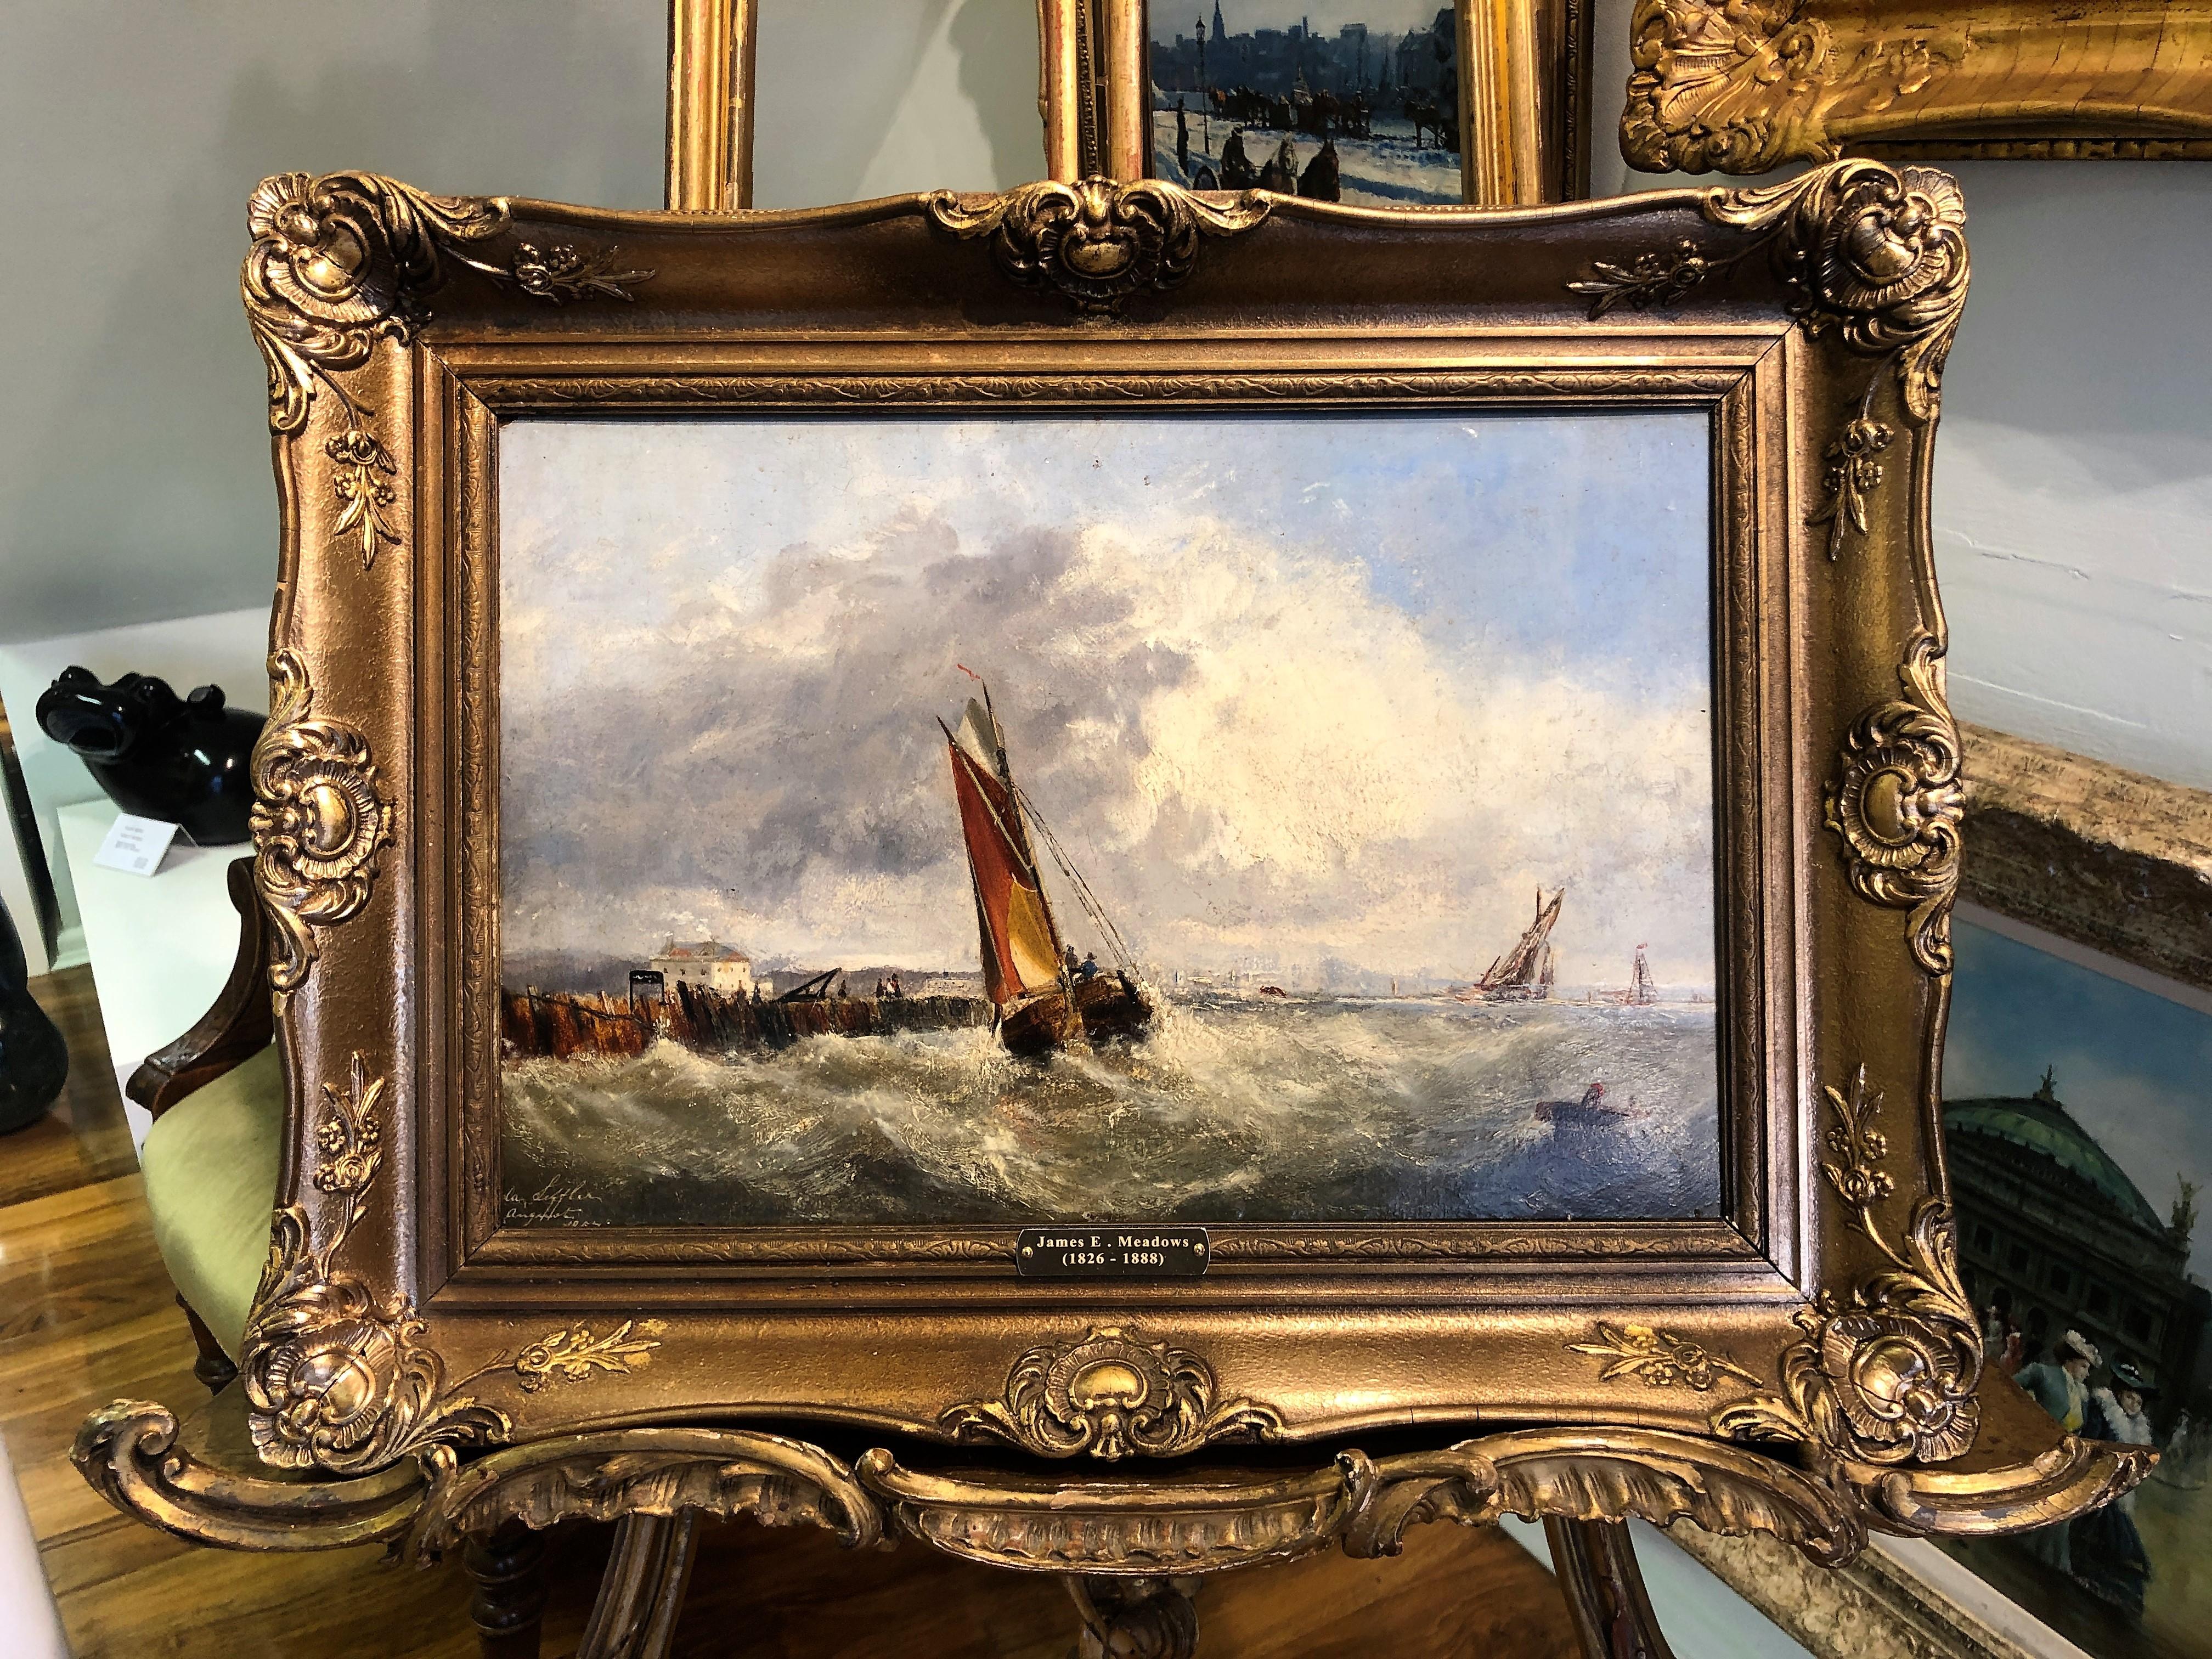 OLD MASTER OIL PAINTING High Quality 19th CENTURY Stormy Seas GGF
Description

Good Condition panel. Cleaned Ready to hang.

